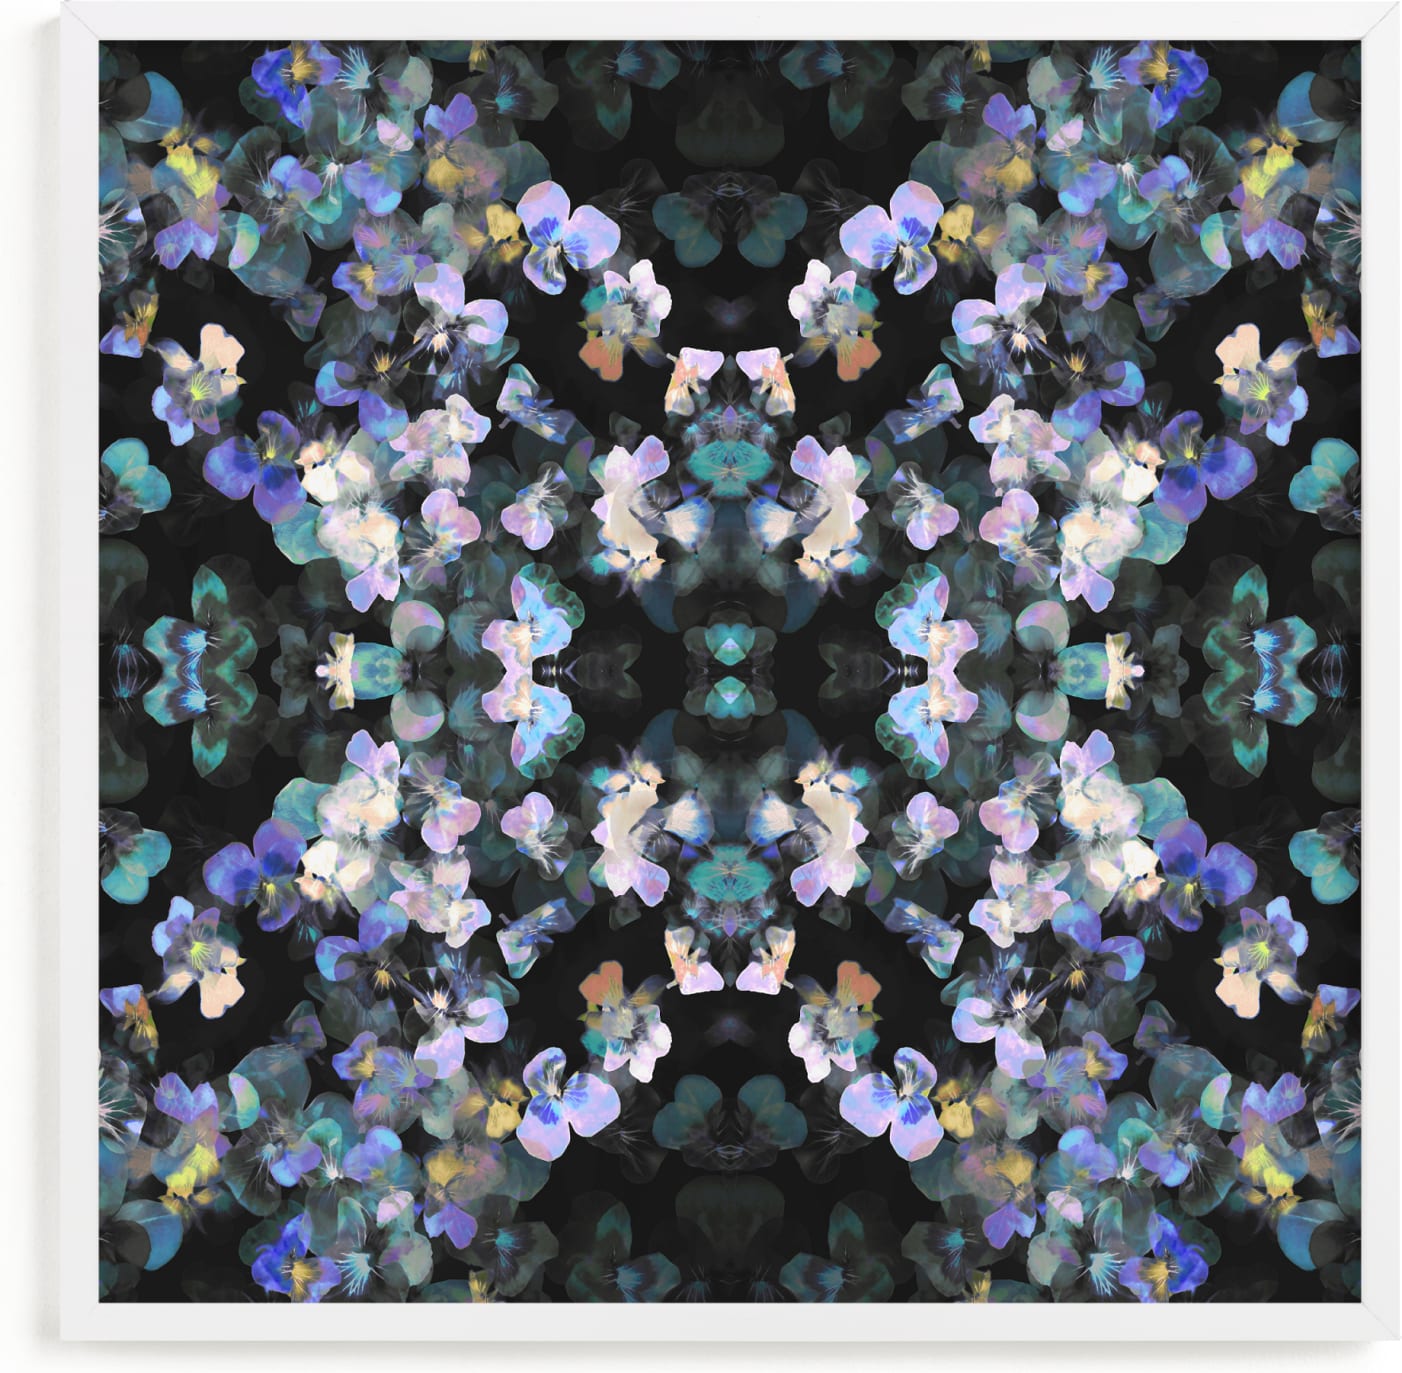 This is a purple art by Oana Prints called Pansy painting - mirrored.